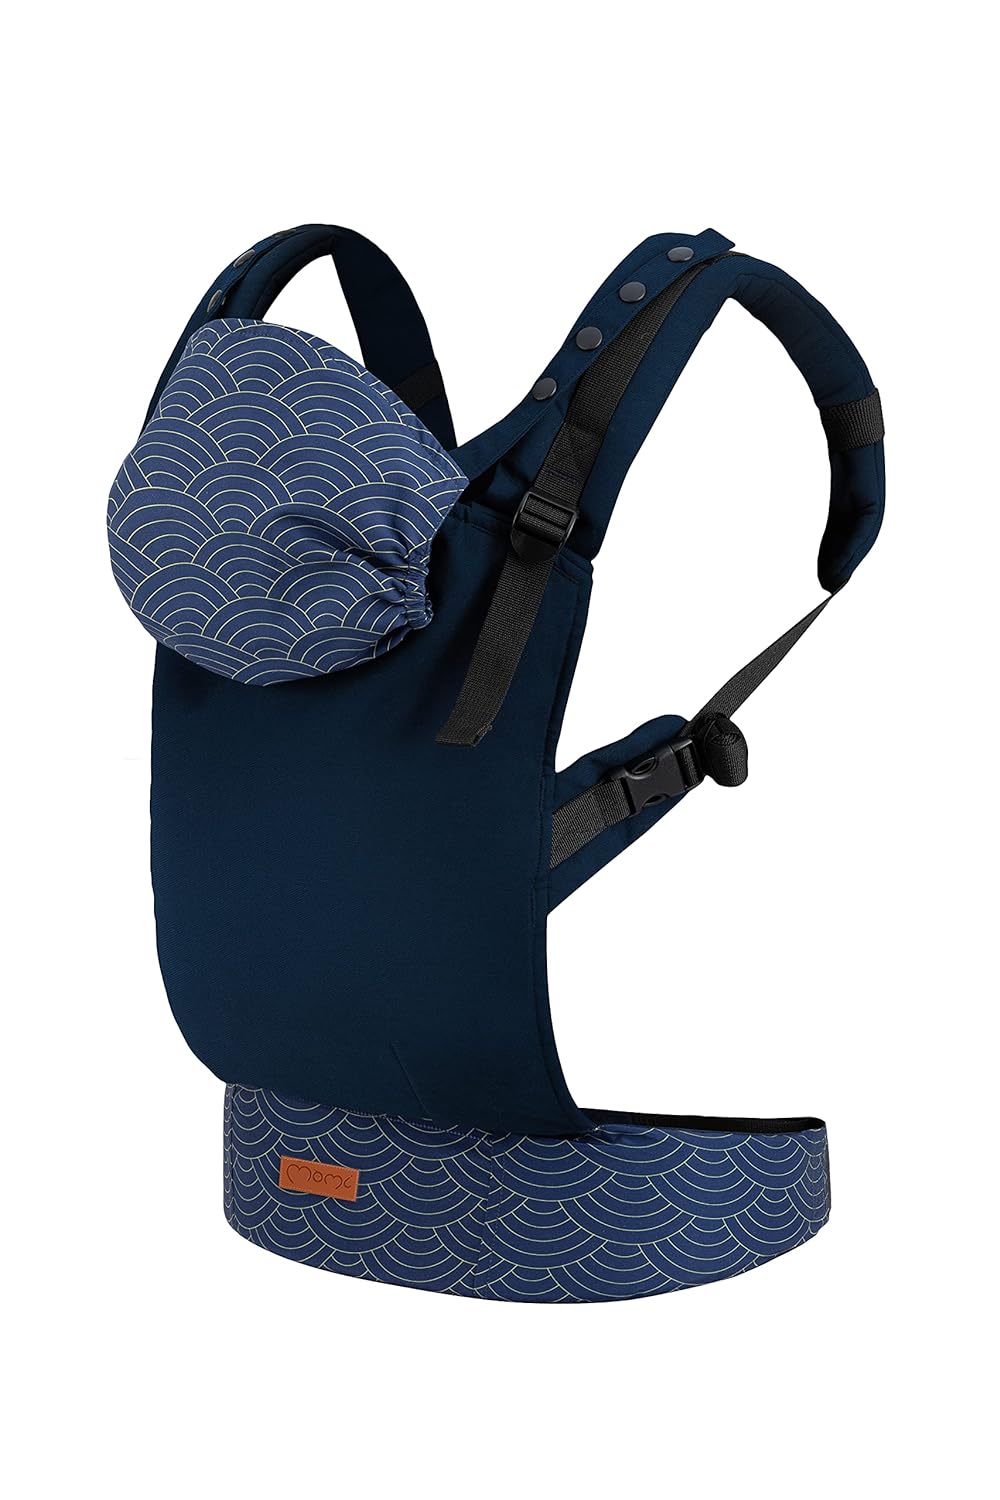 MOMI Collete Baby Carrier from 3 Months of Age, for Babies and Toddlers up to 20 kg Body Weight, with Hood and Head Support for Baby, Optimal Adjustment with 6 Adjustment Points | Love